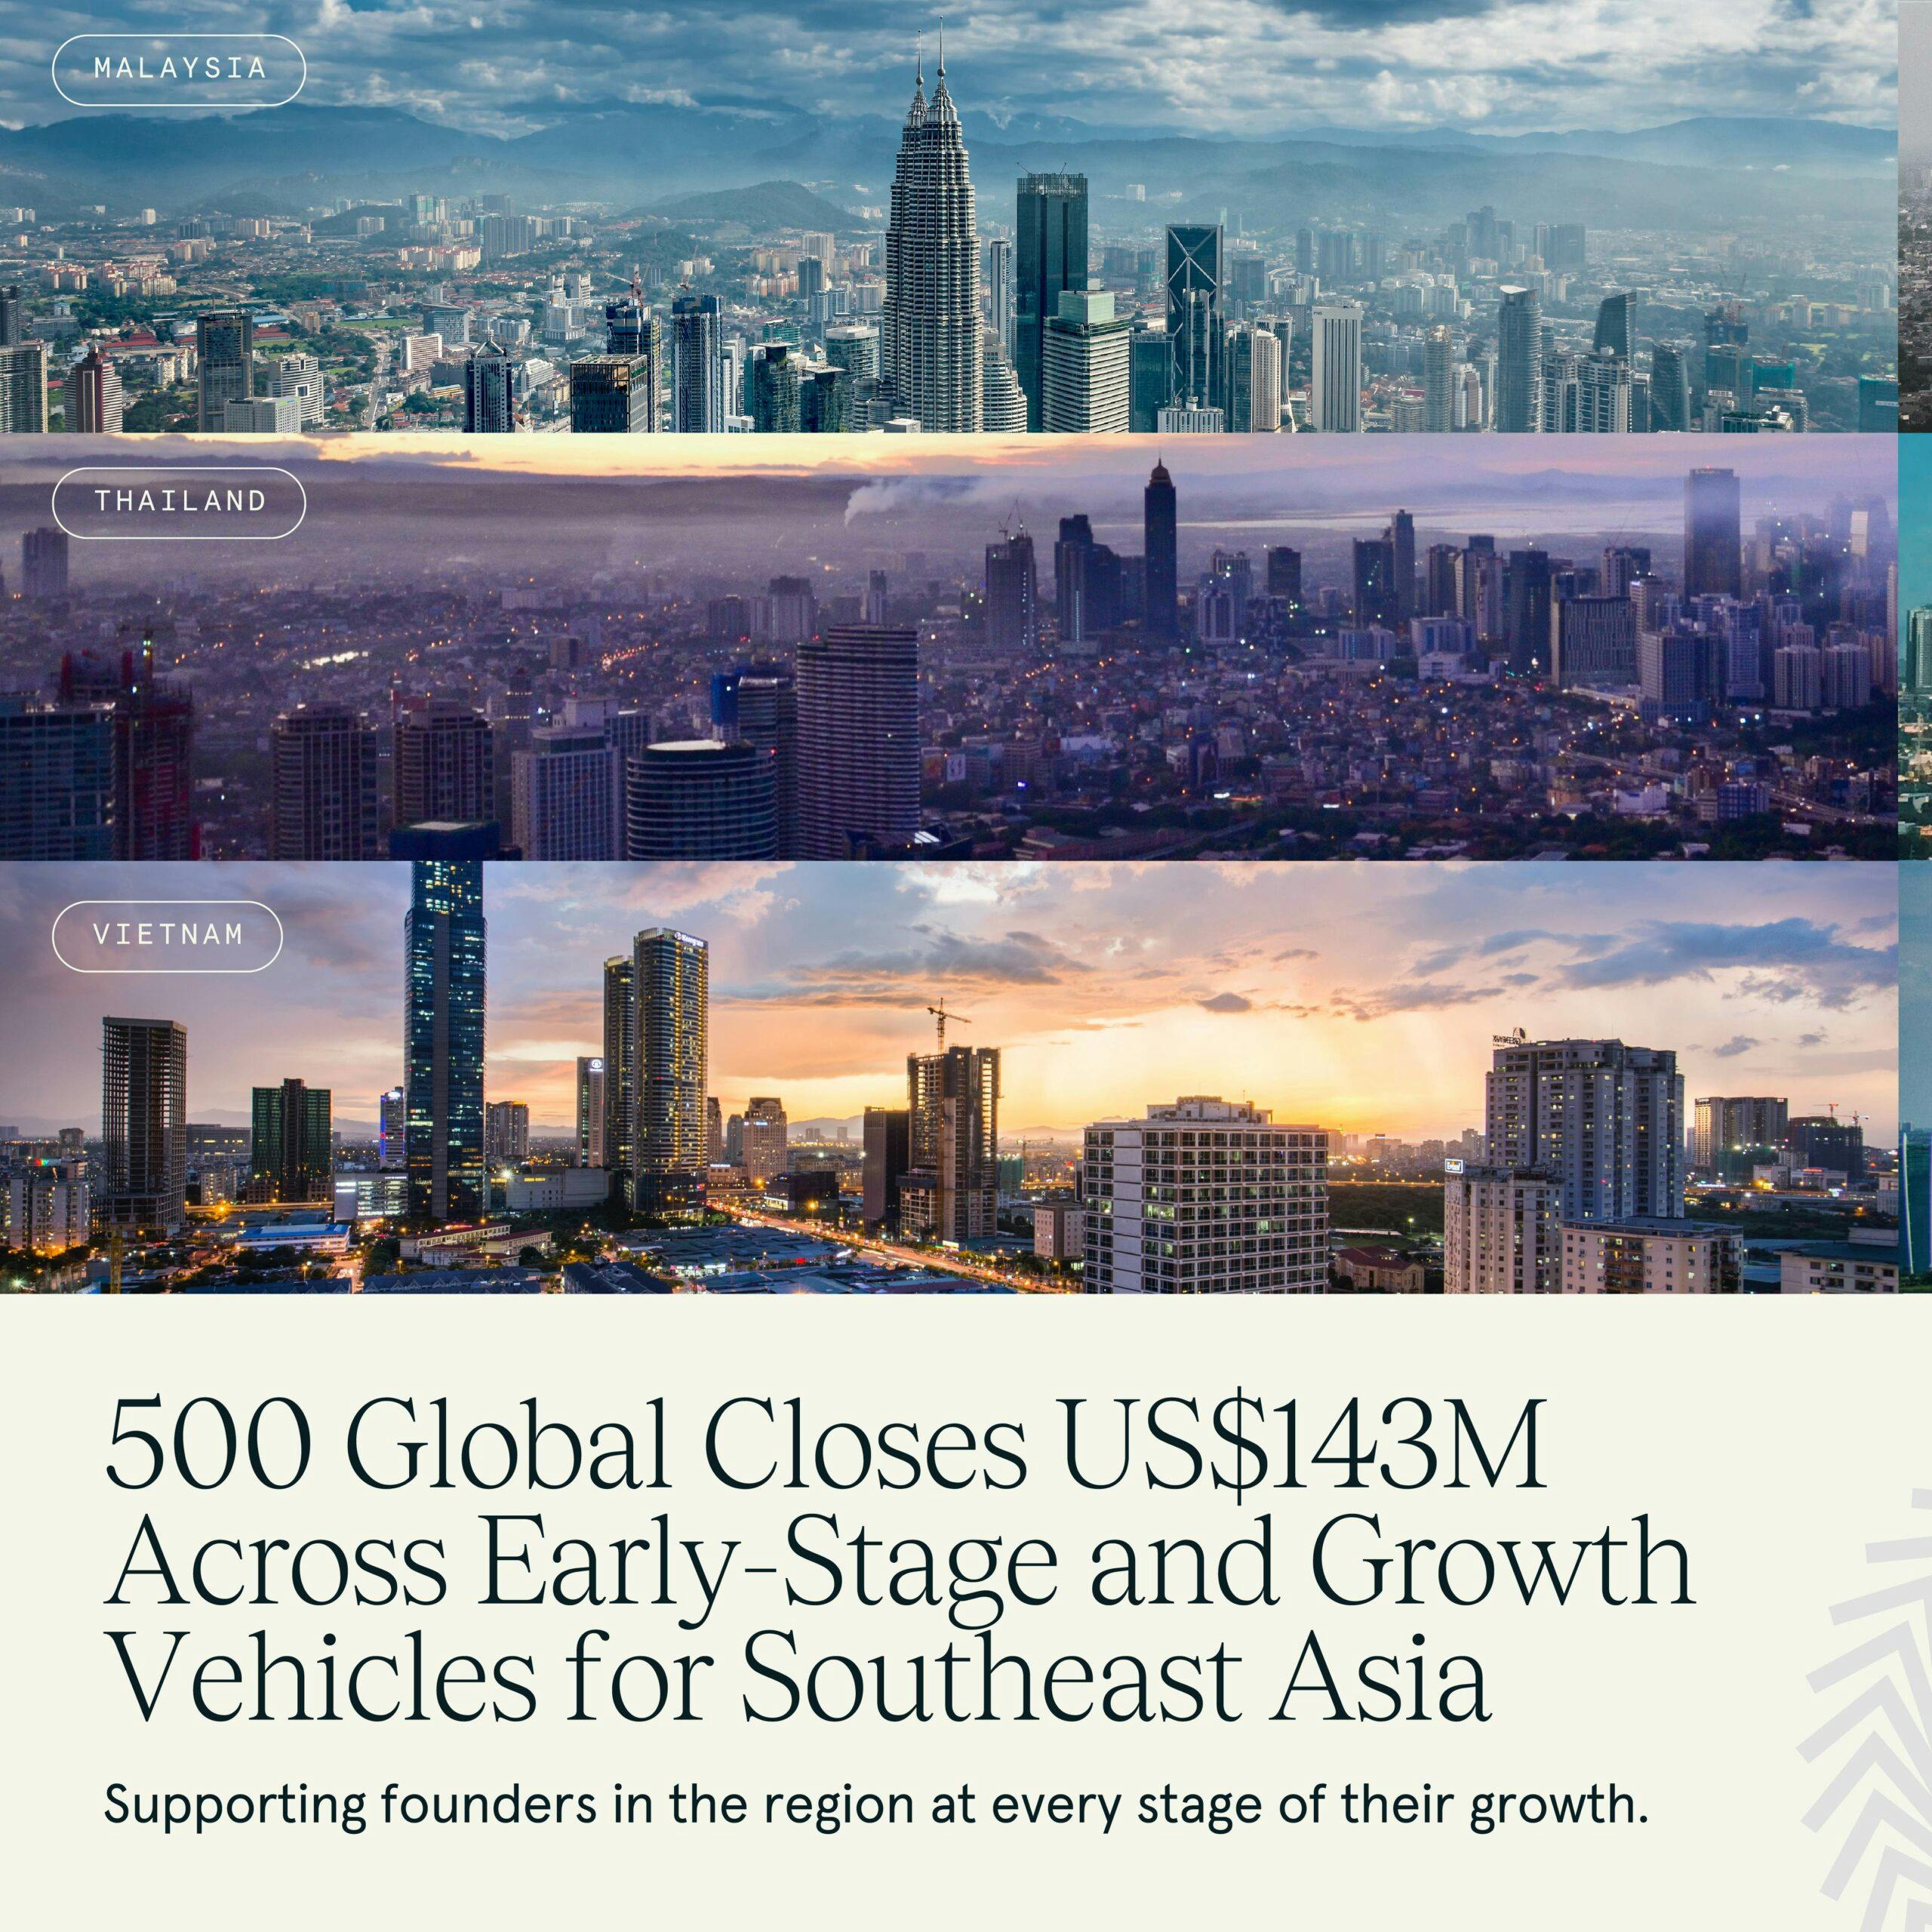 500 Global Closes US$143M Across Early-Stage and Growth Vehicles for Southeast Asia